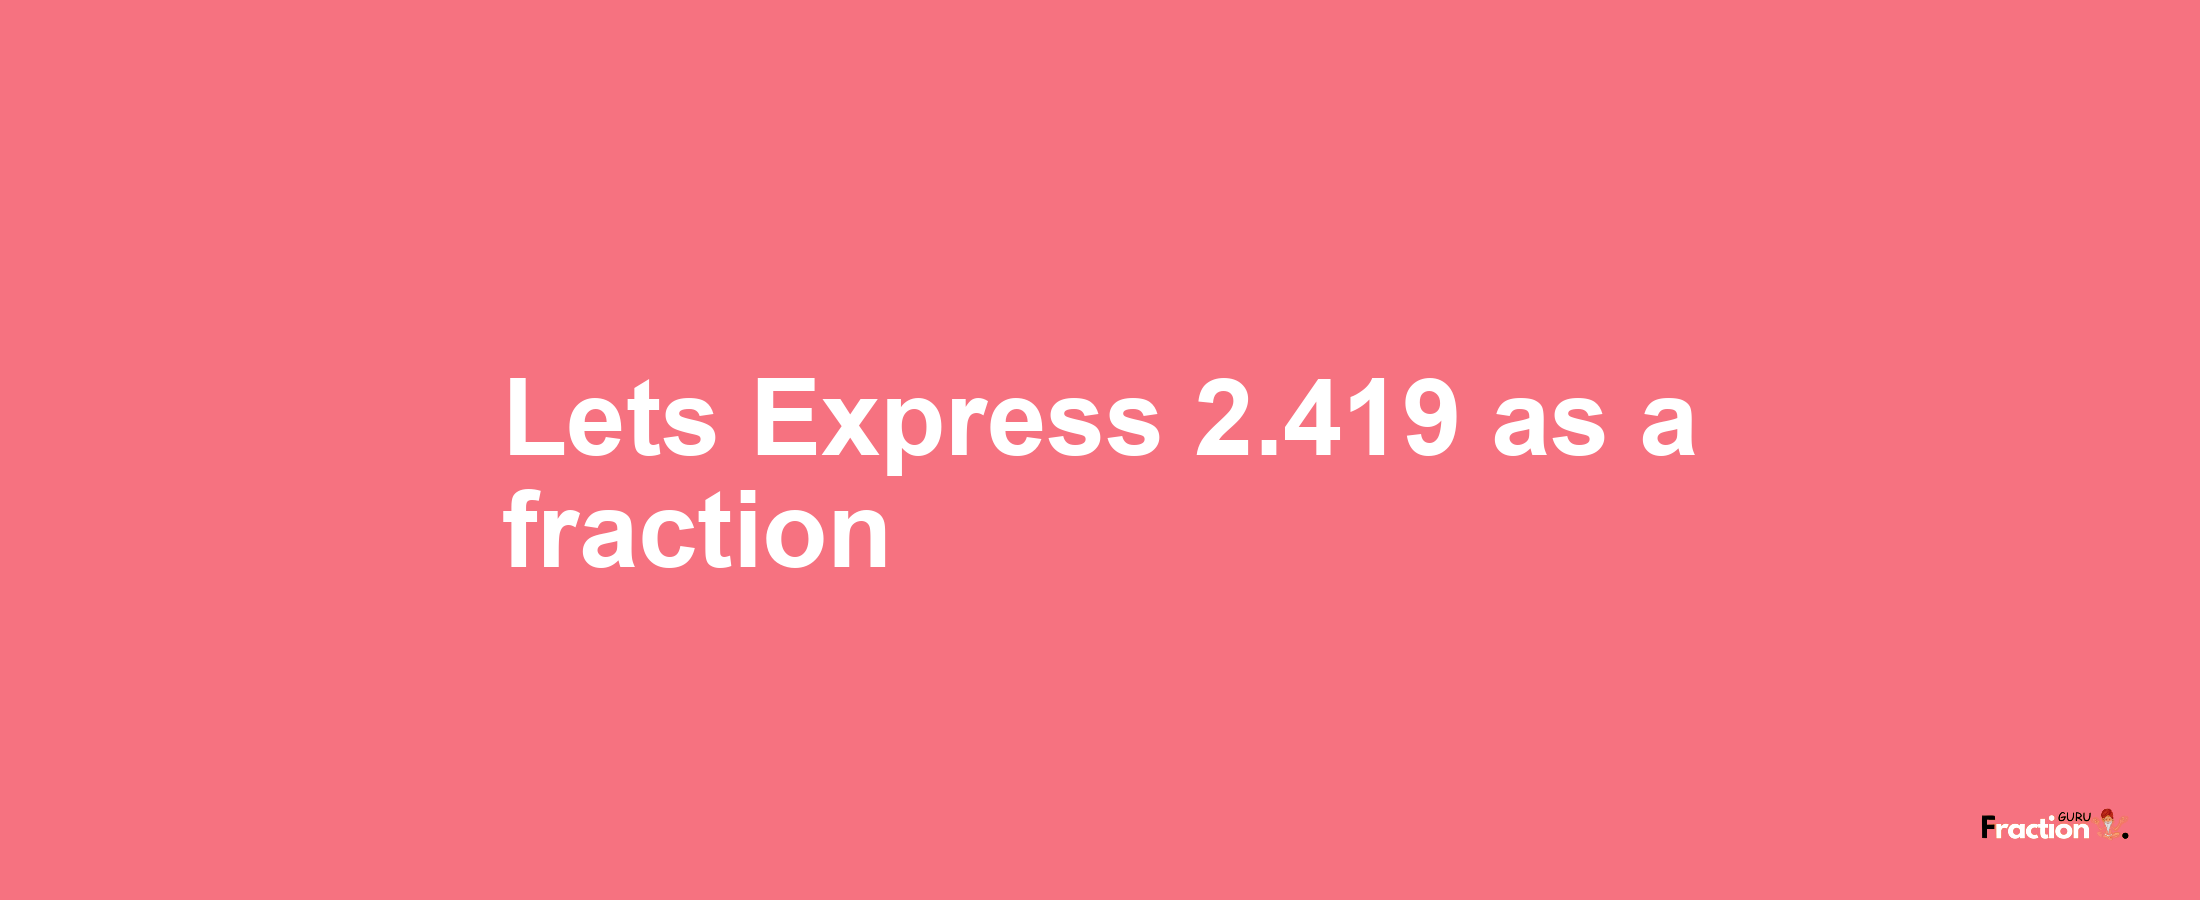 Lets Express 2.419 as afraction